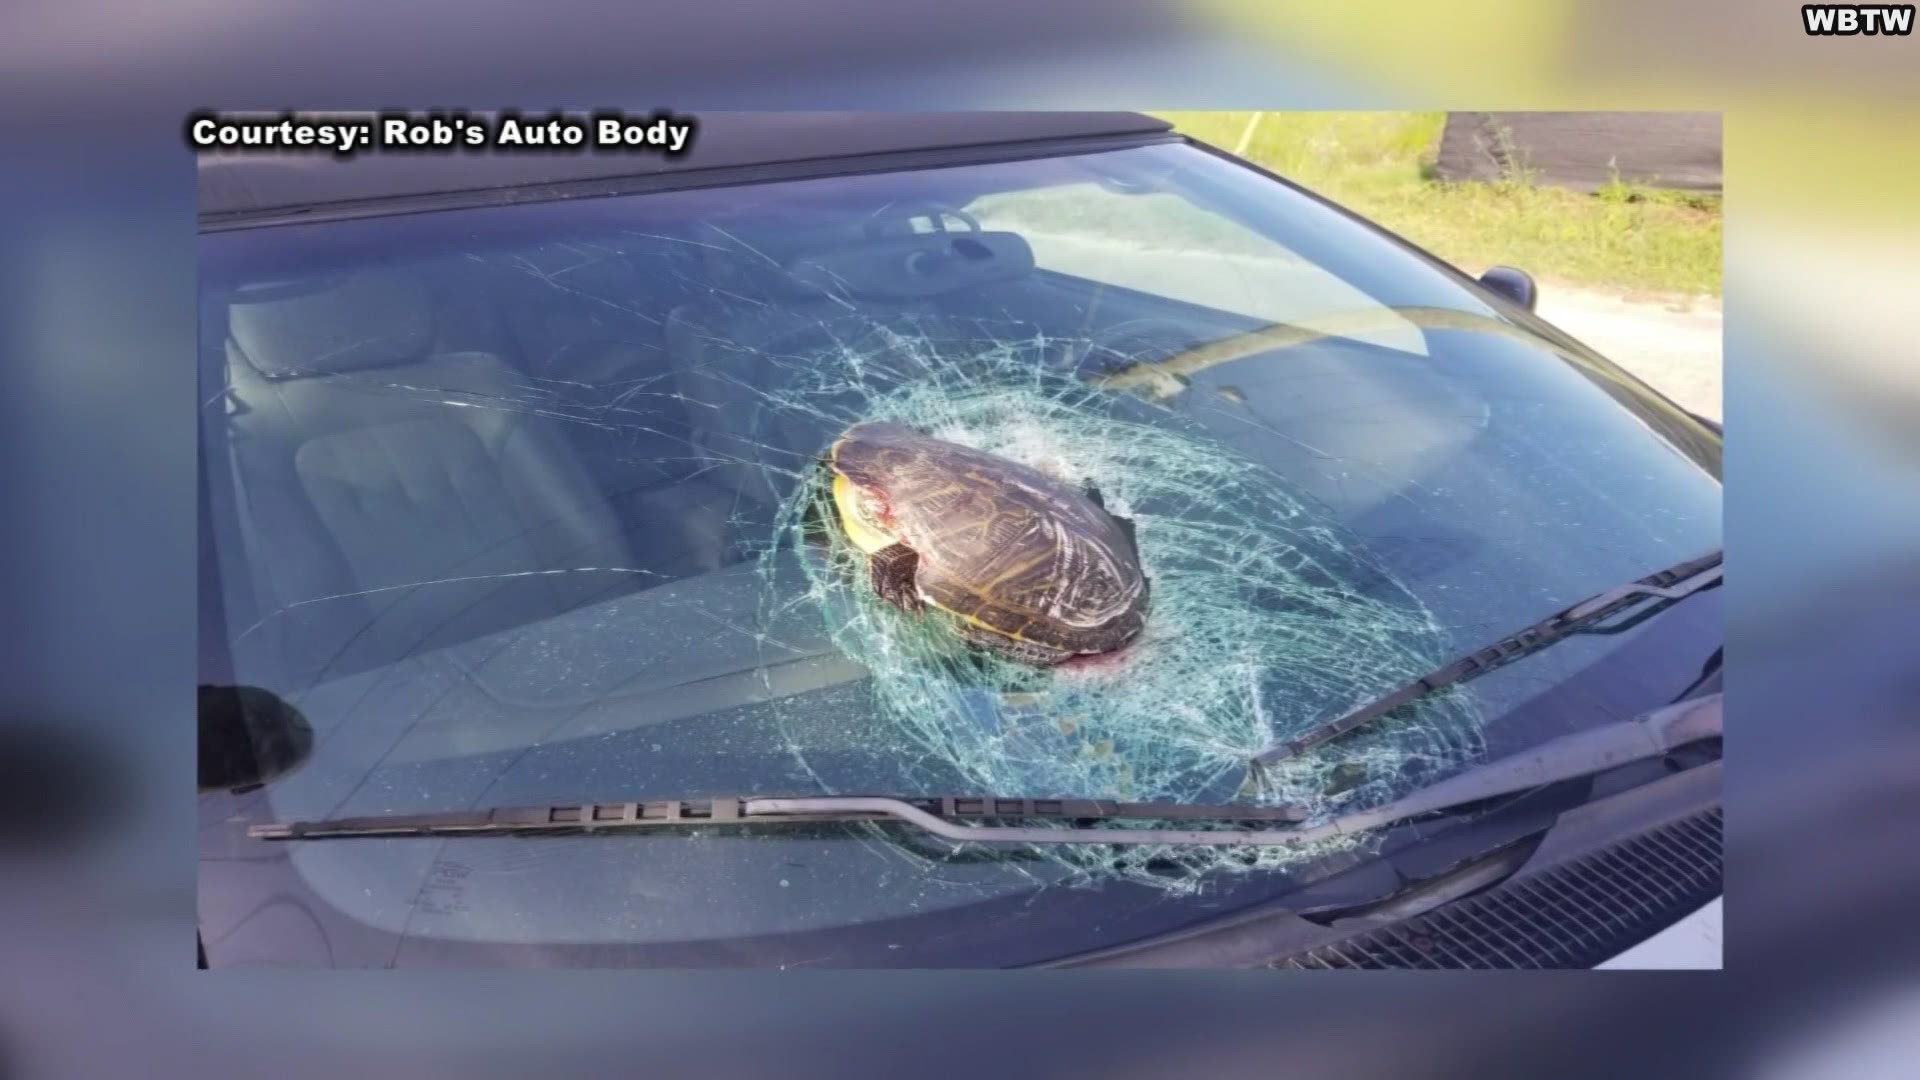 A South Carolina man was shocked when a tortoise flew into his windshield this week while driving down the highway.